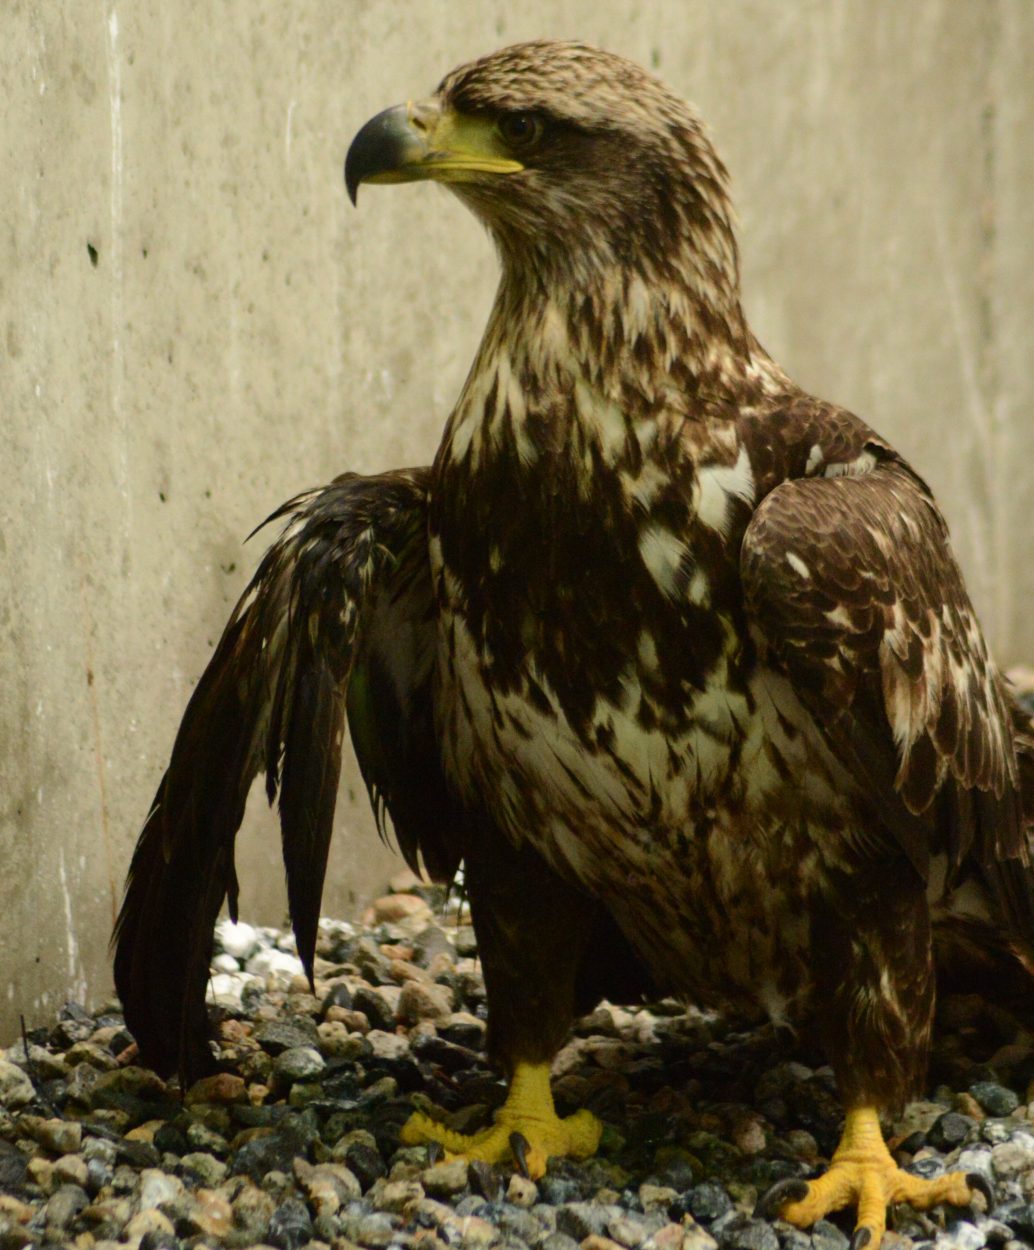 Rescued Petersburg eagle recovering